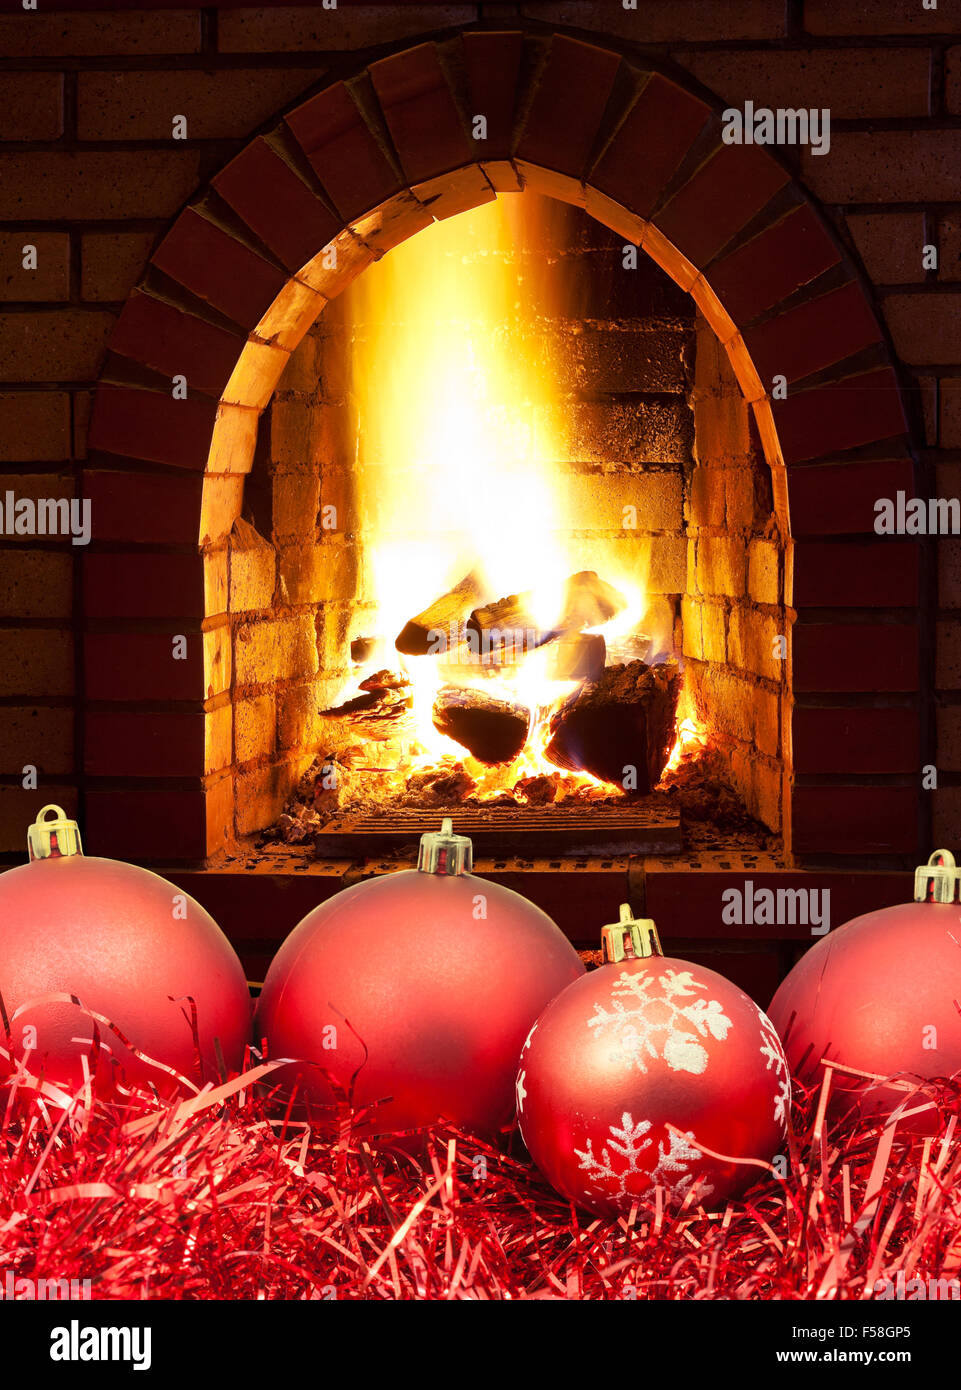 red Christmas balls and tinsel with open fire in home fireplace Stock Photo